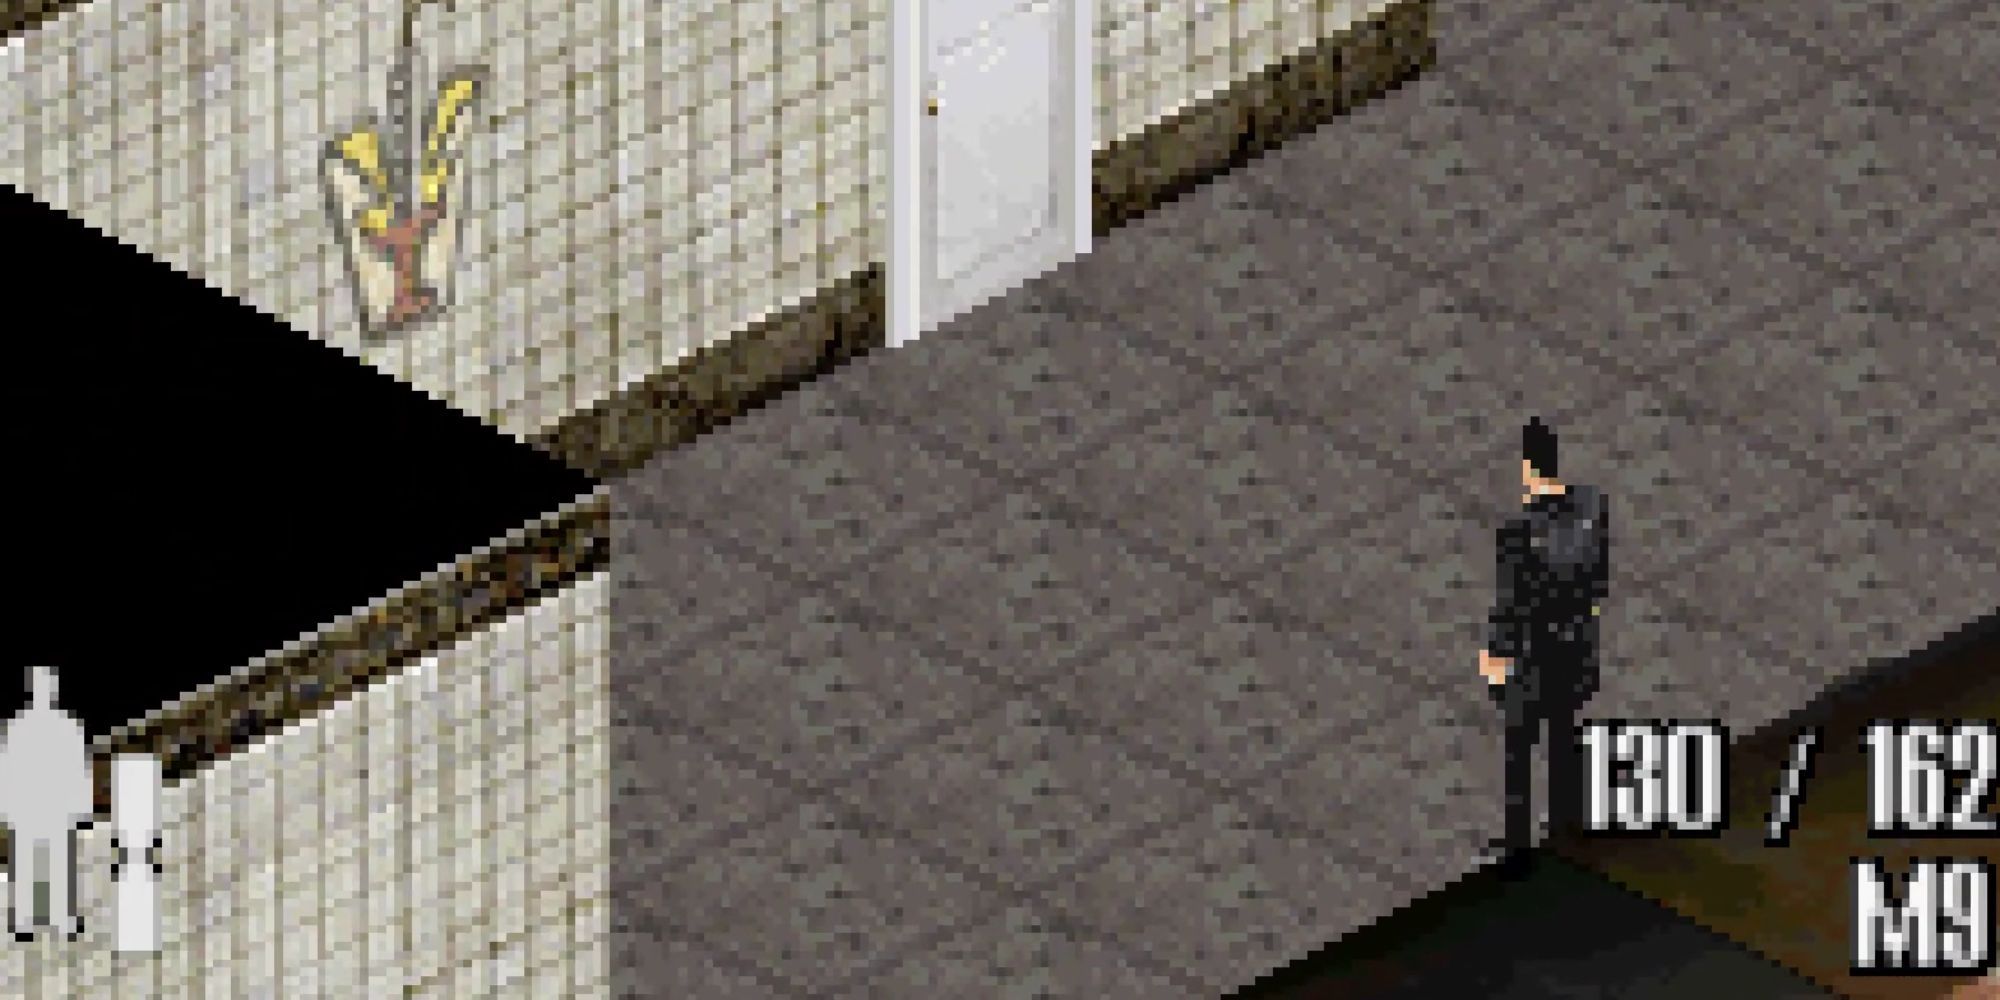 Max Payne on the Game Boy Advance.